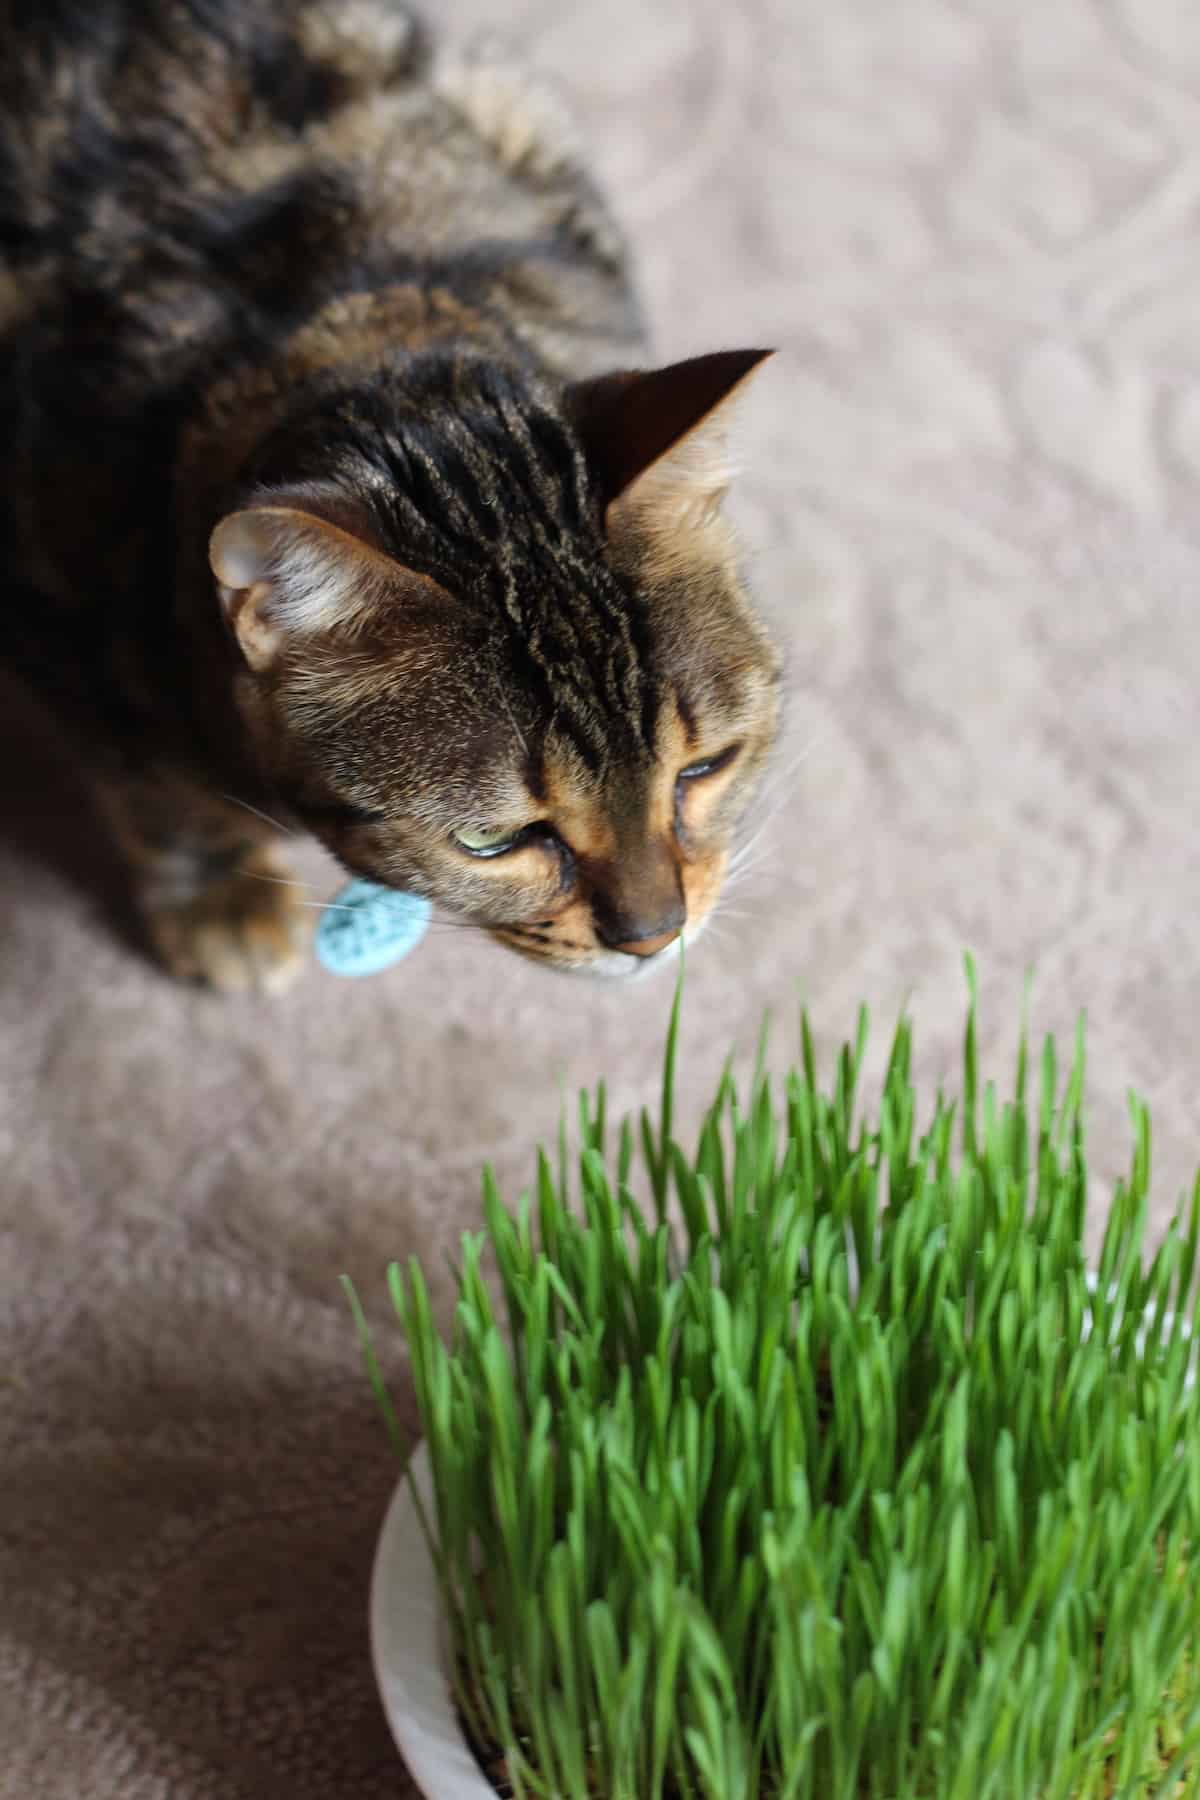 Heirloom Cat Grass Seed Keep Your Pet Happy and Healthy Grow Fresh Kitty Grass for Chewing Cat Grass Seeds Bulk: 100% Non-GMO Cat Grass Seeds for Indoor Cats 